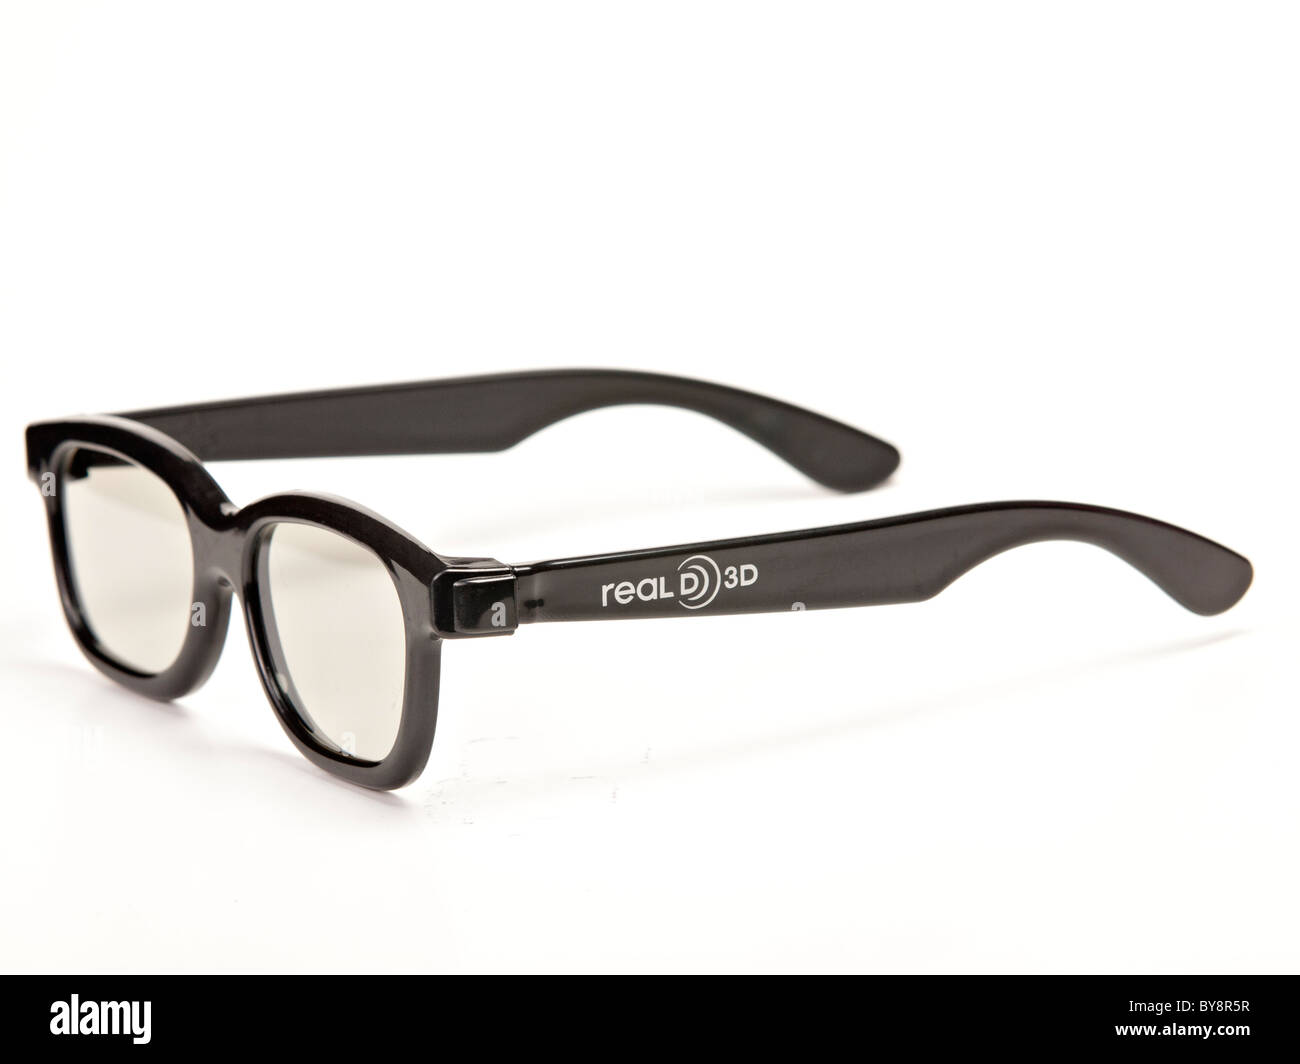 3D glasses lying on white background seen from an eye-level view Stock Photo